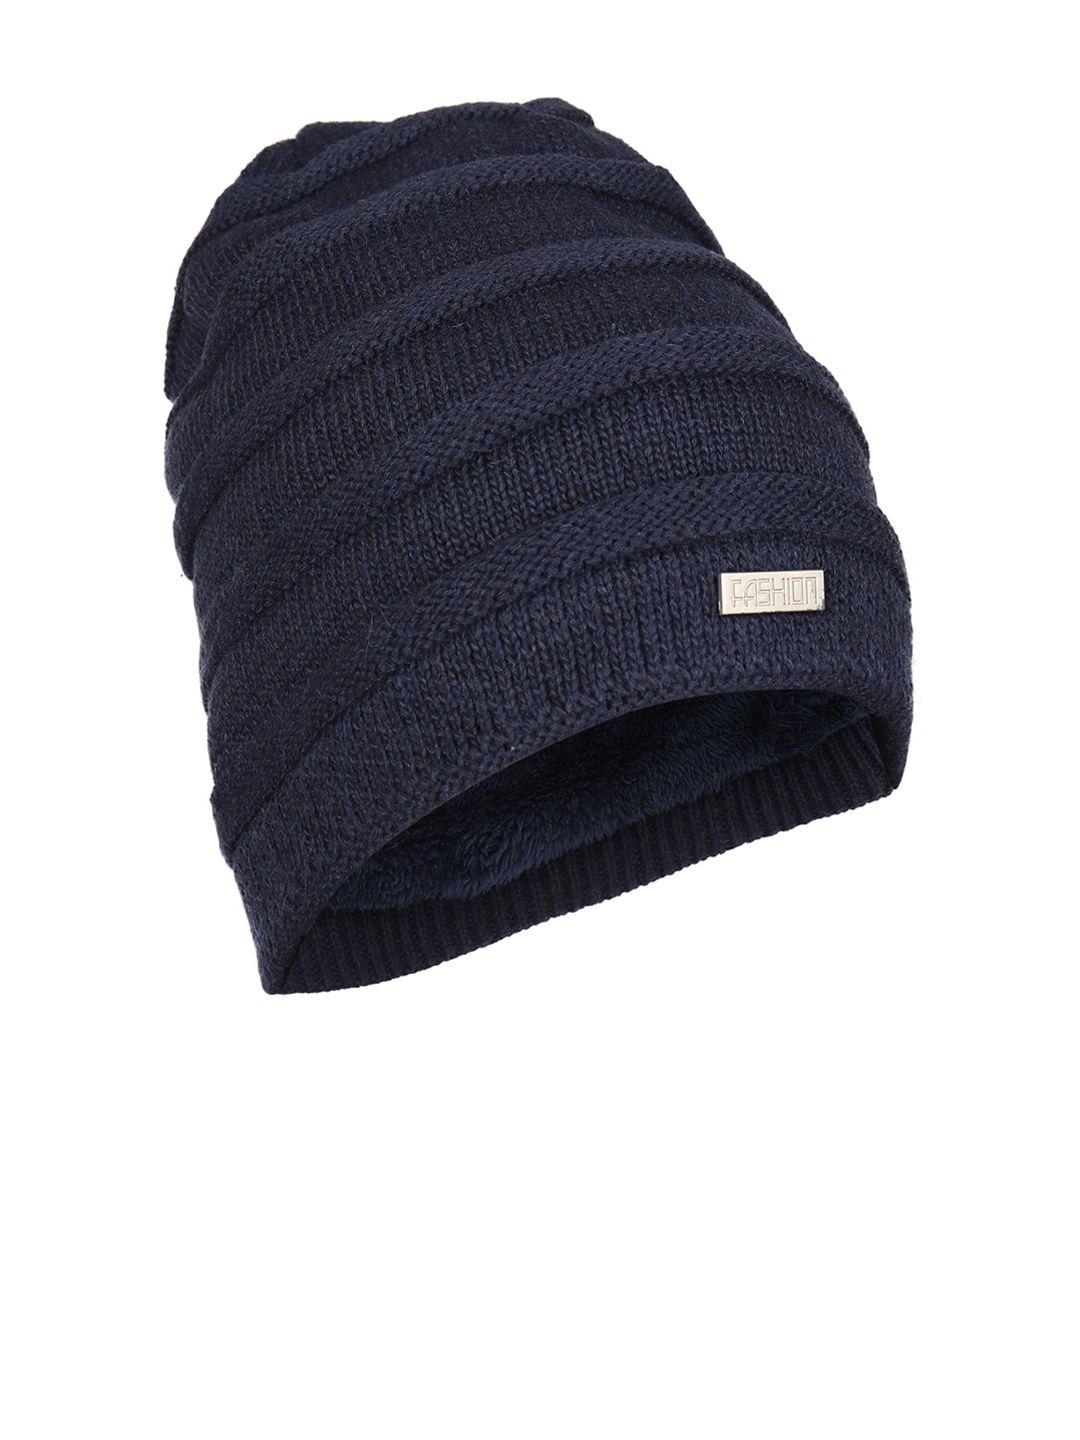 iSWEVEN Unisex Blue Solid Self-Design Woven Expandable Beanie Price in India